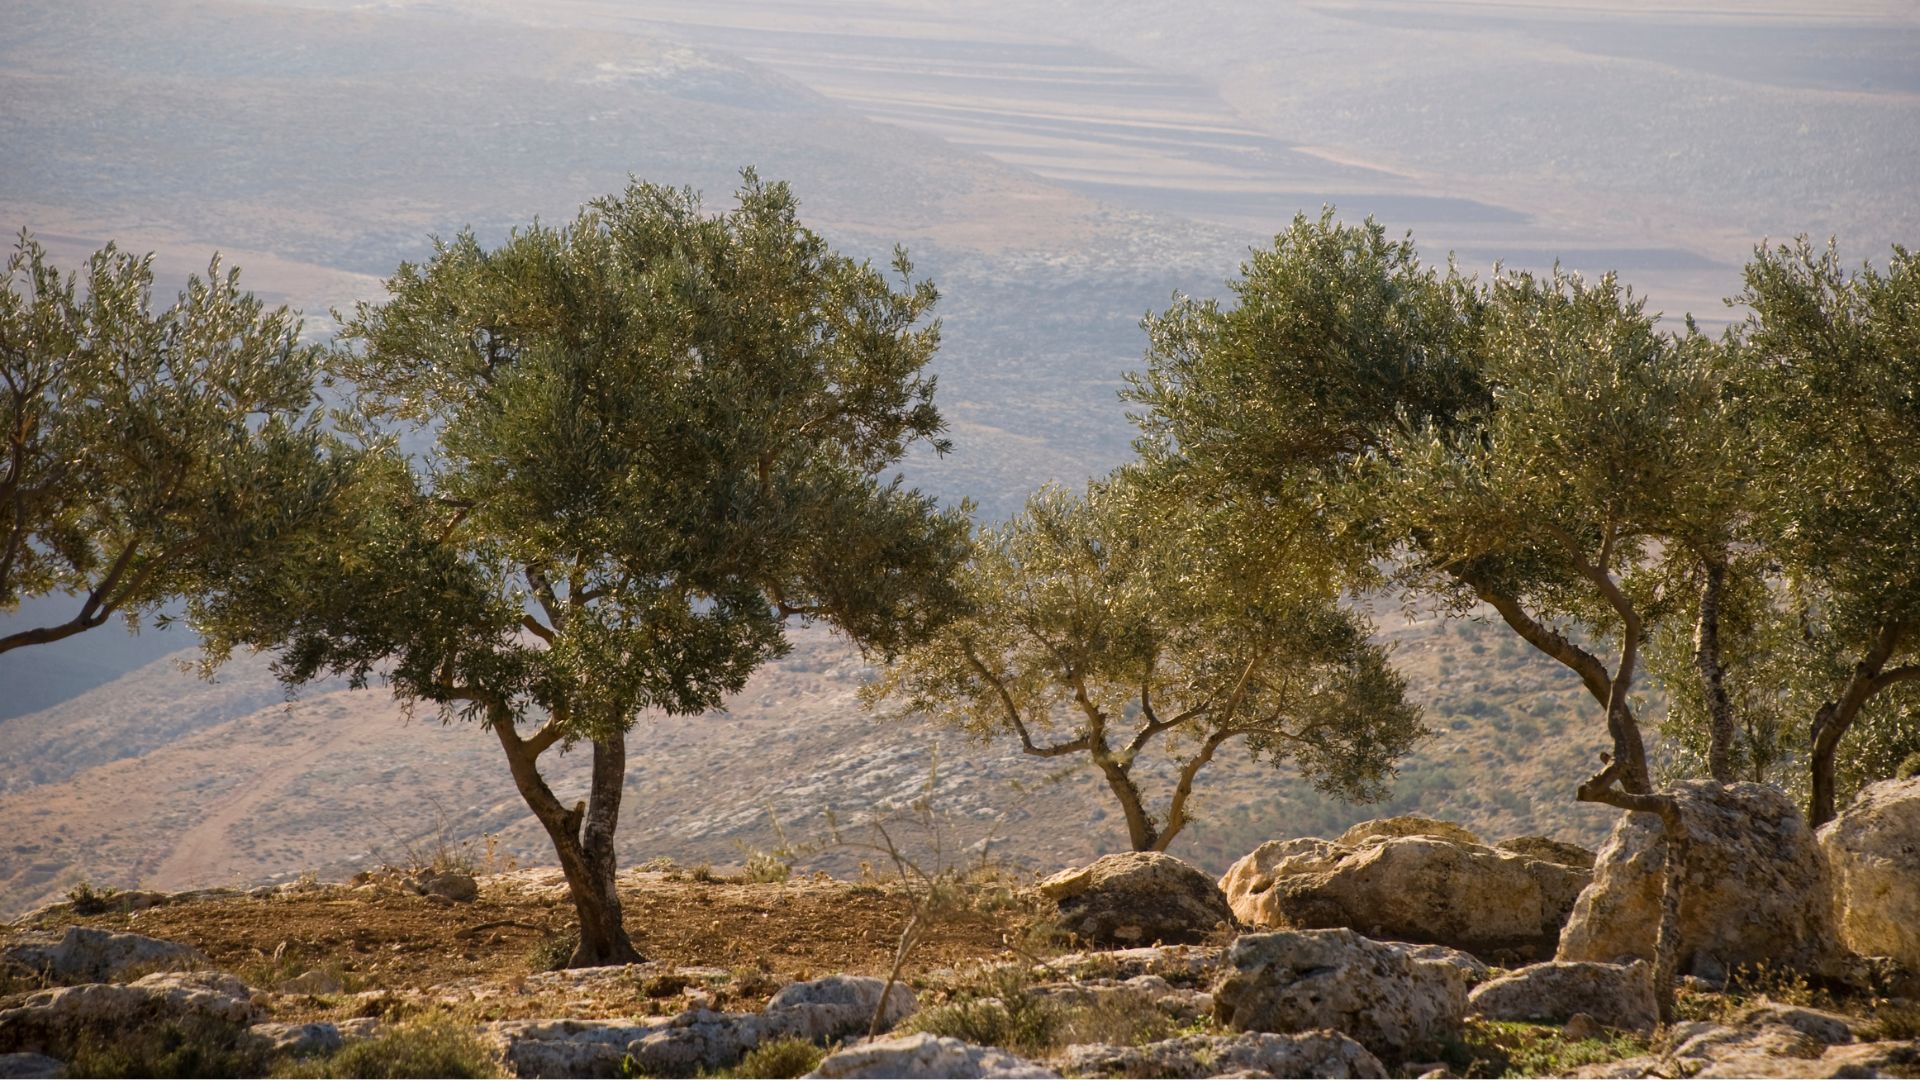 Landscape with olive trees in Palestine